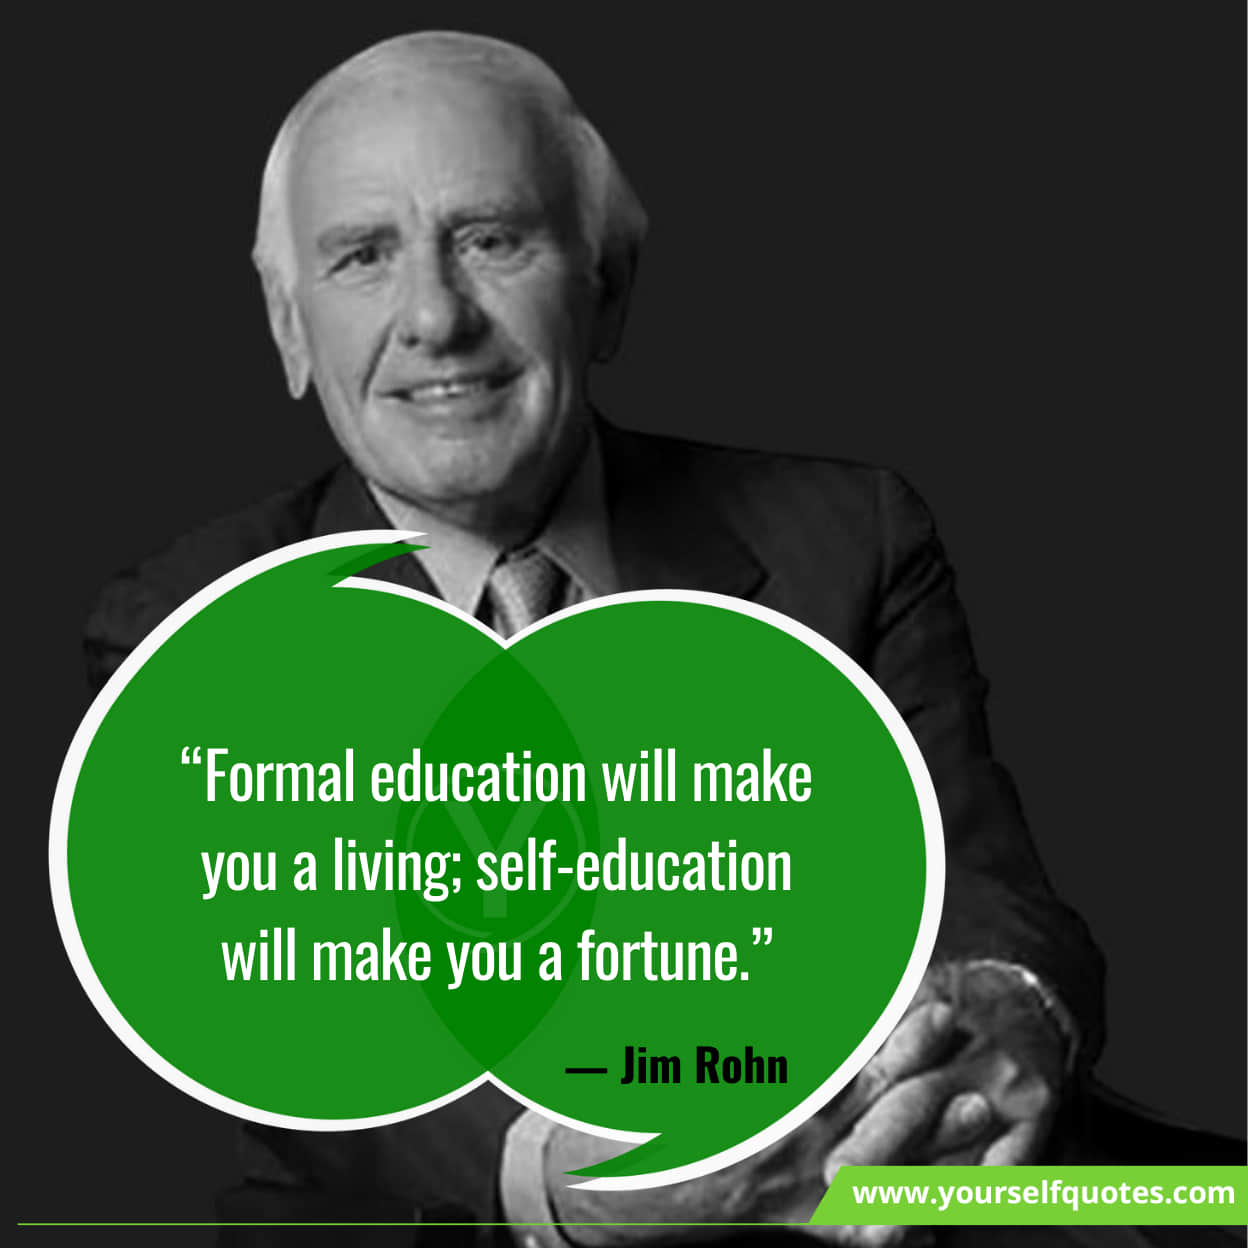 Personal Development Quotes by Jim Rohn